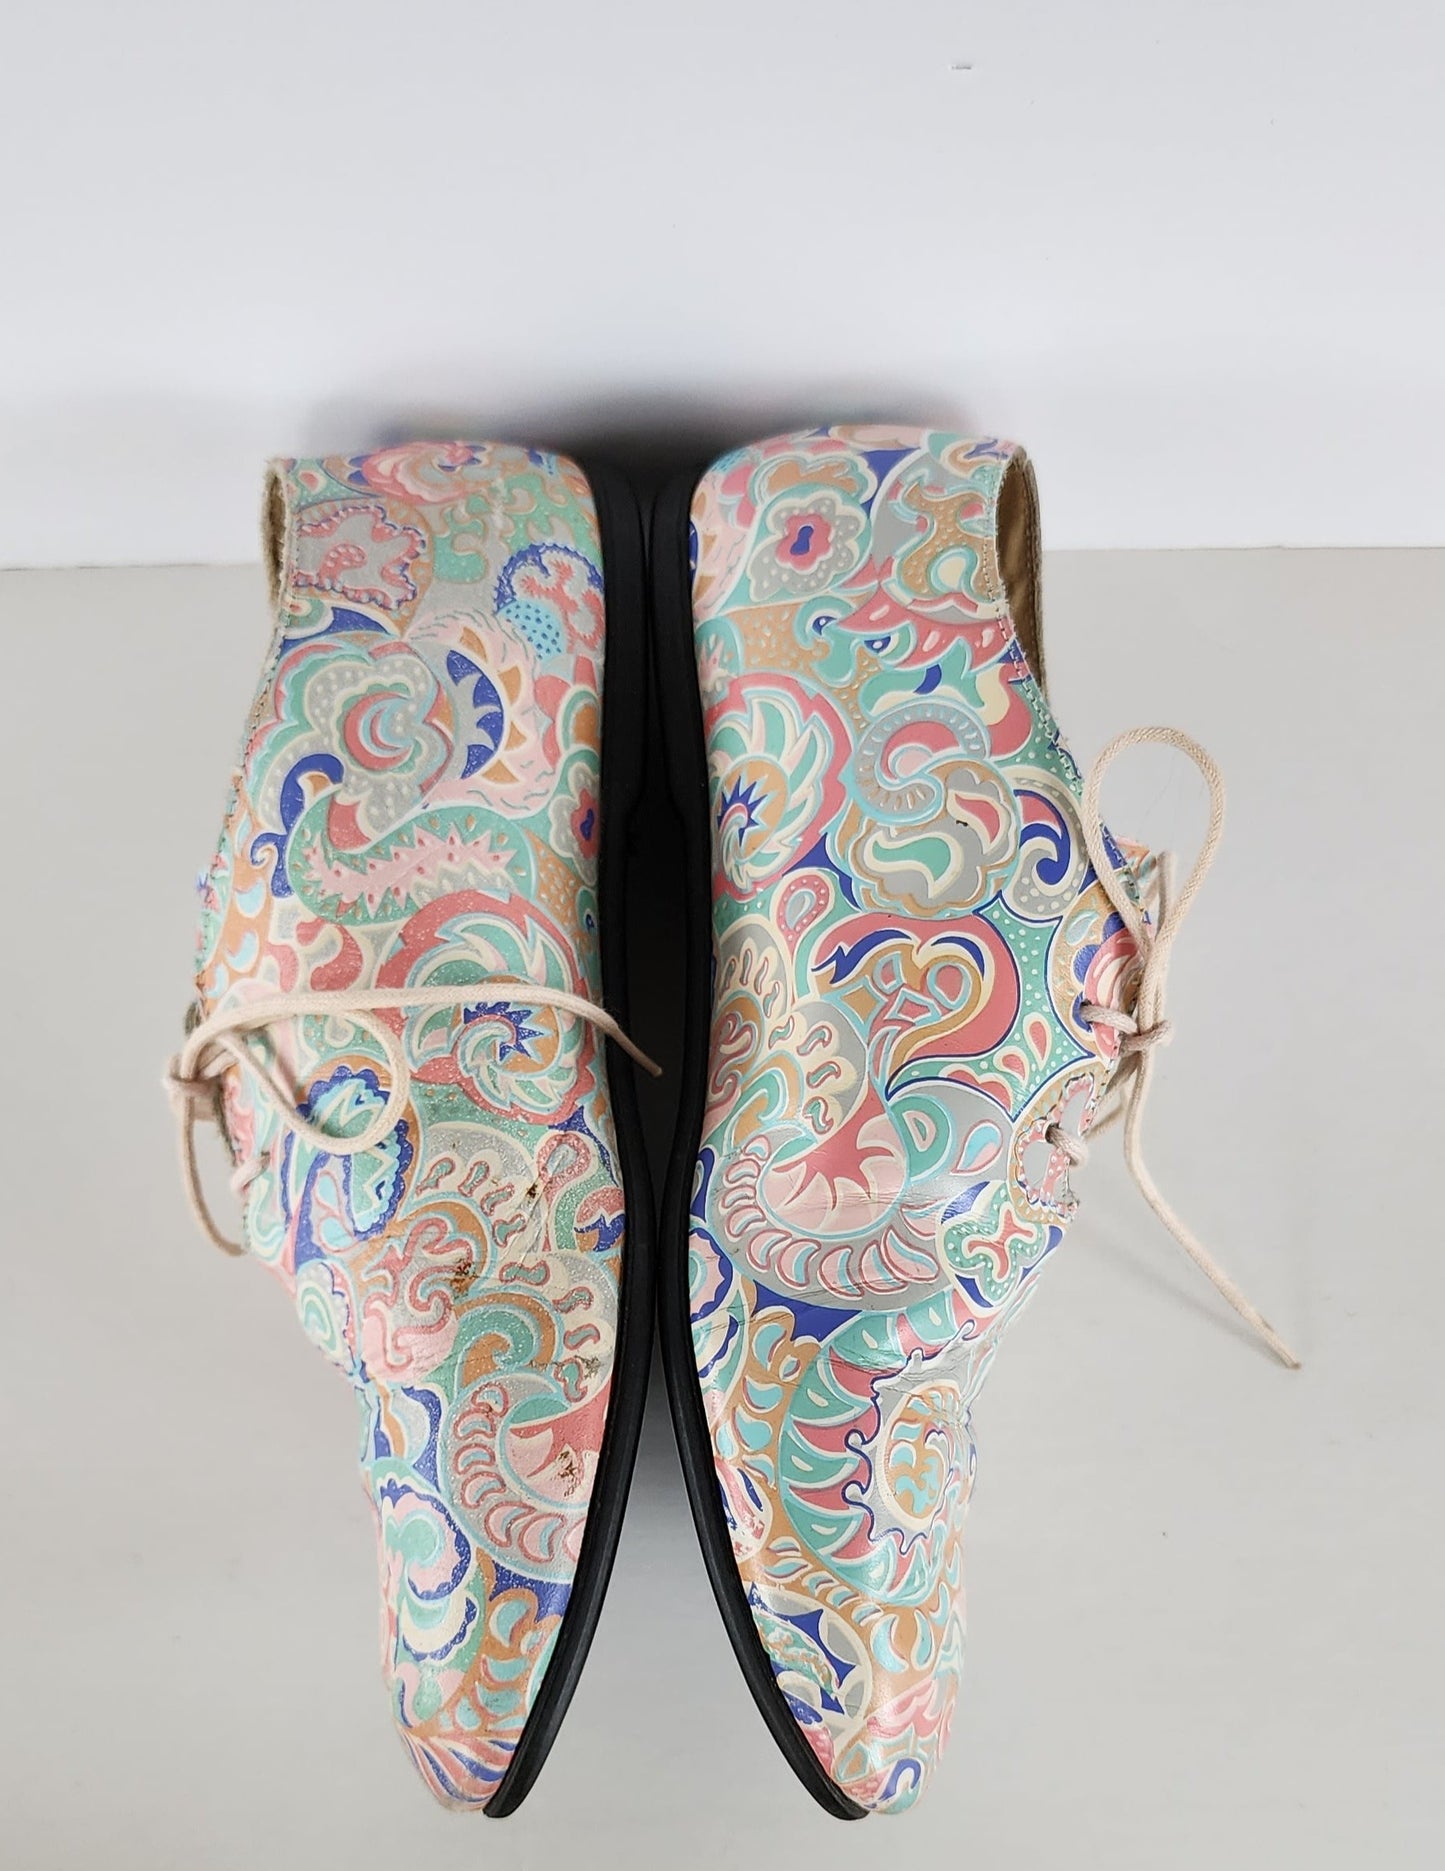 Vintage 80s Paisley Print Loafers Lace Up Shoes Free Lance 38